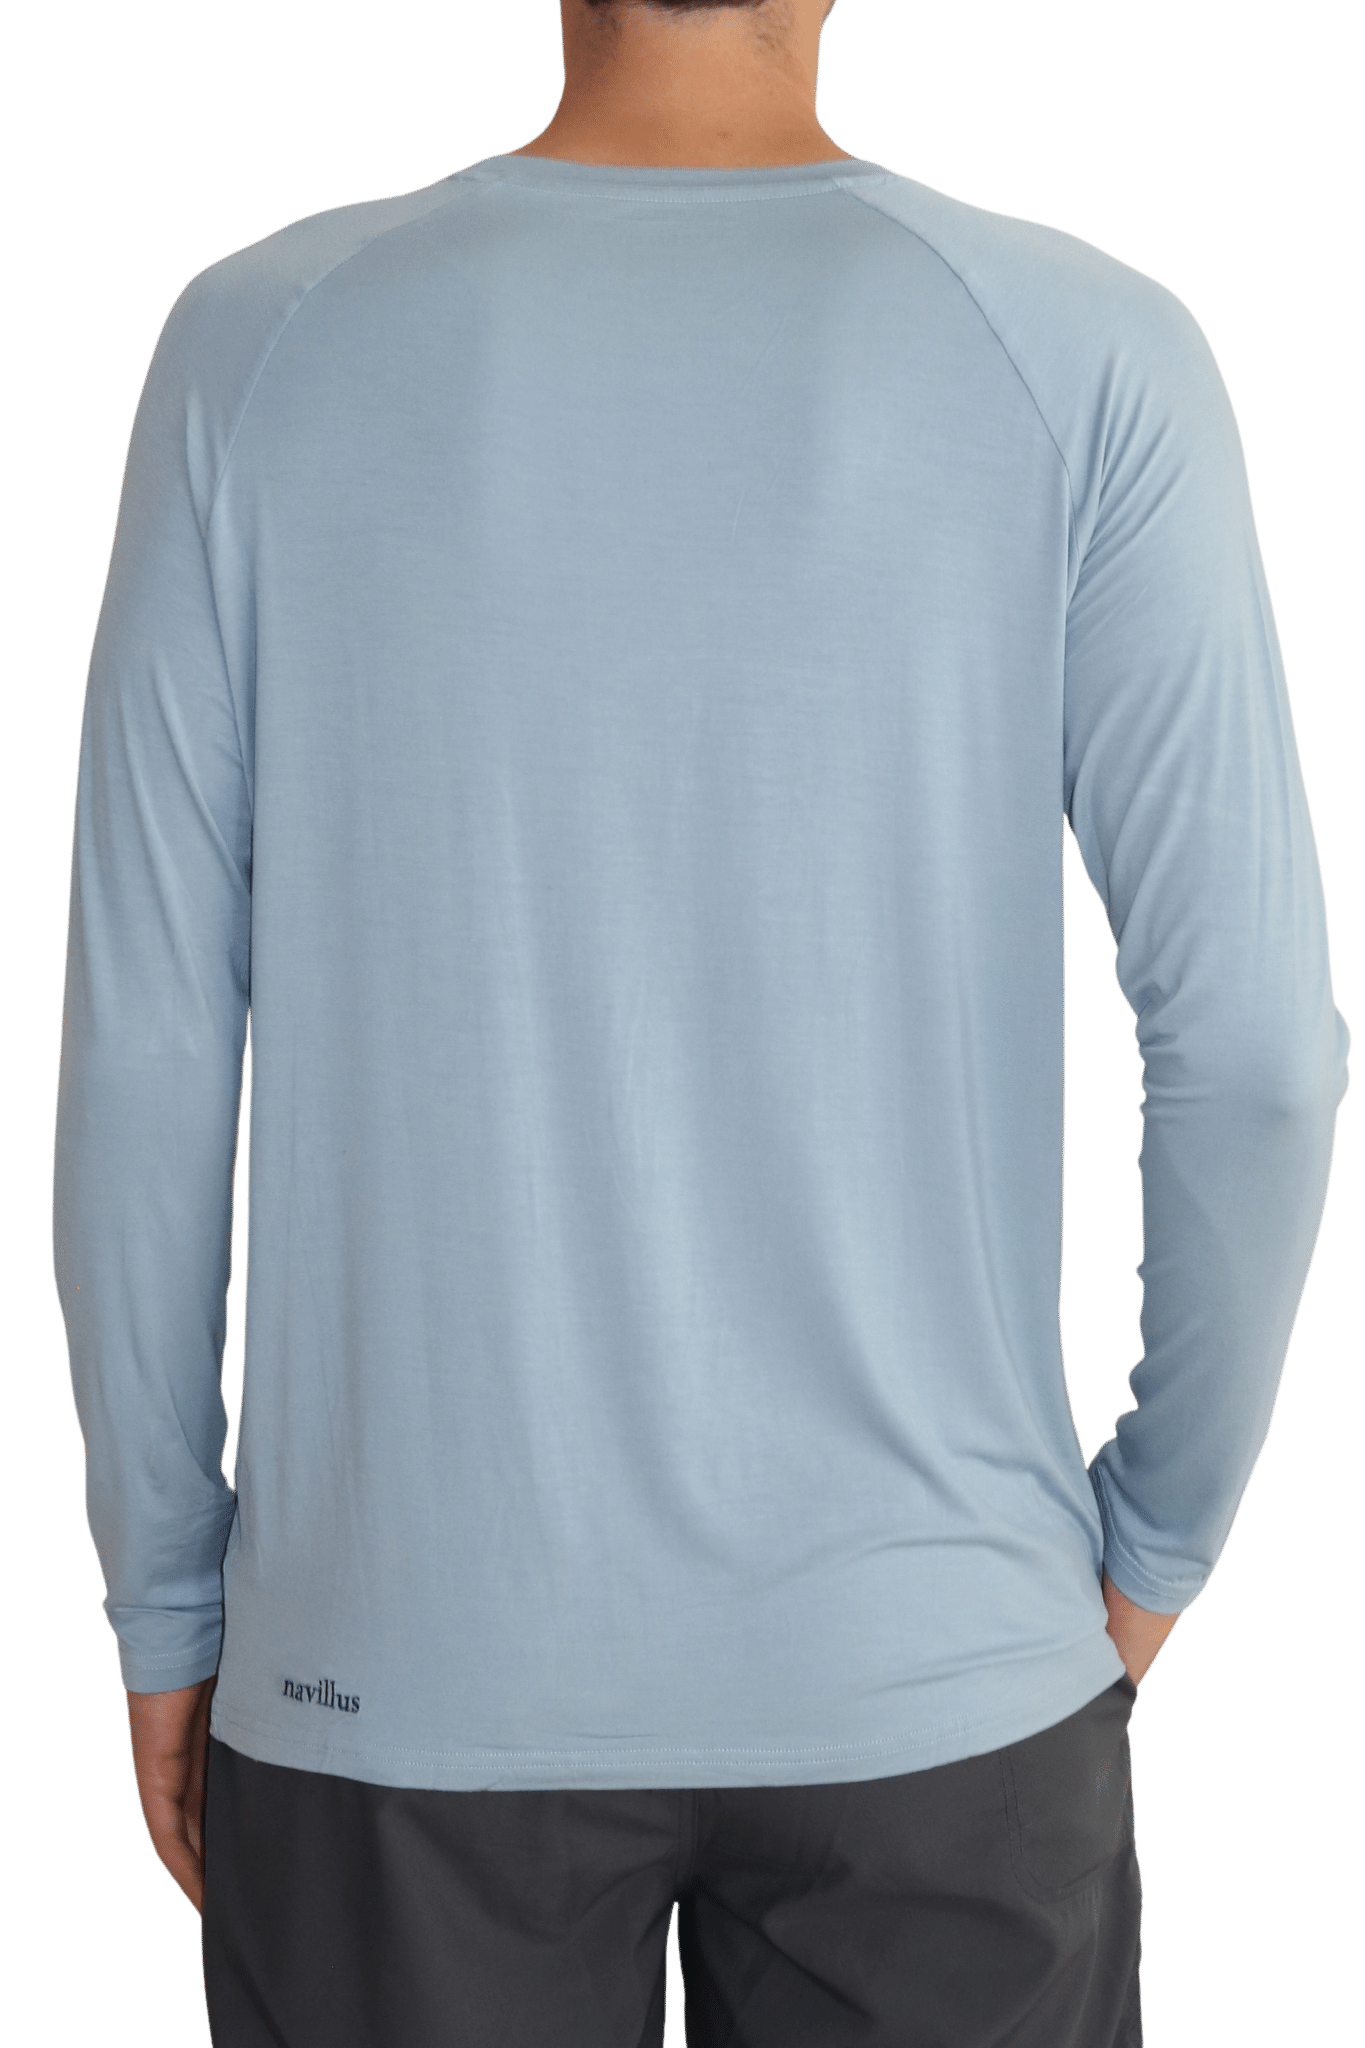 Back of the new light ocean blue icon long sleeve bamboo shirt with 35+ UPF sun protection.